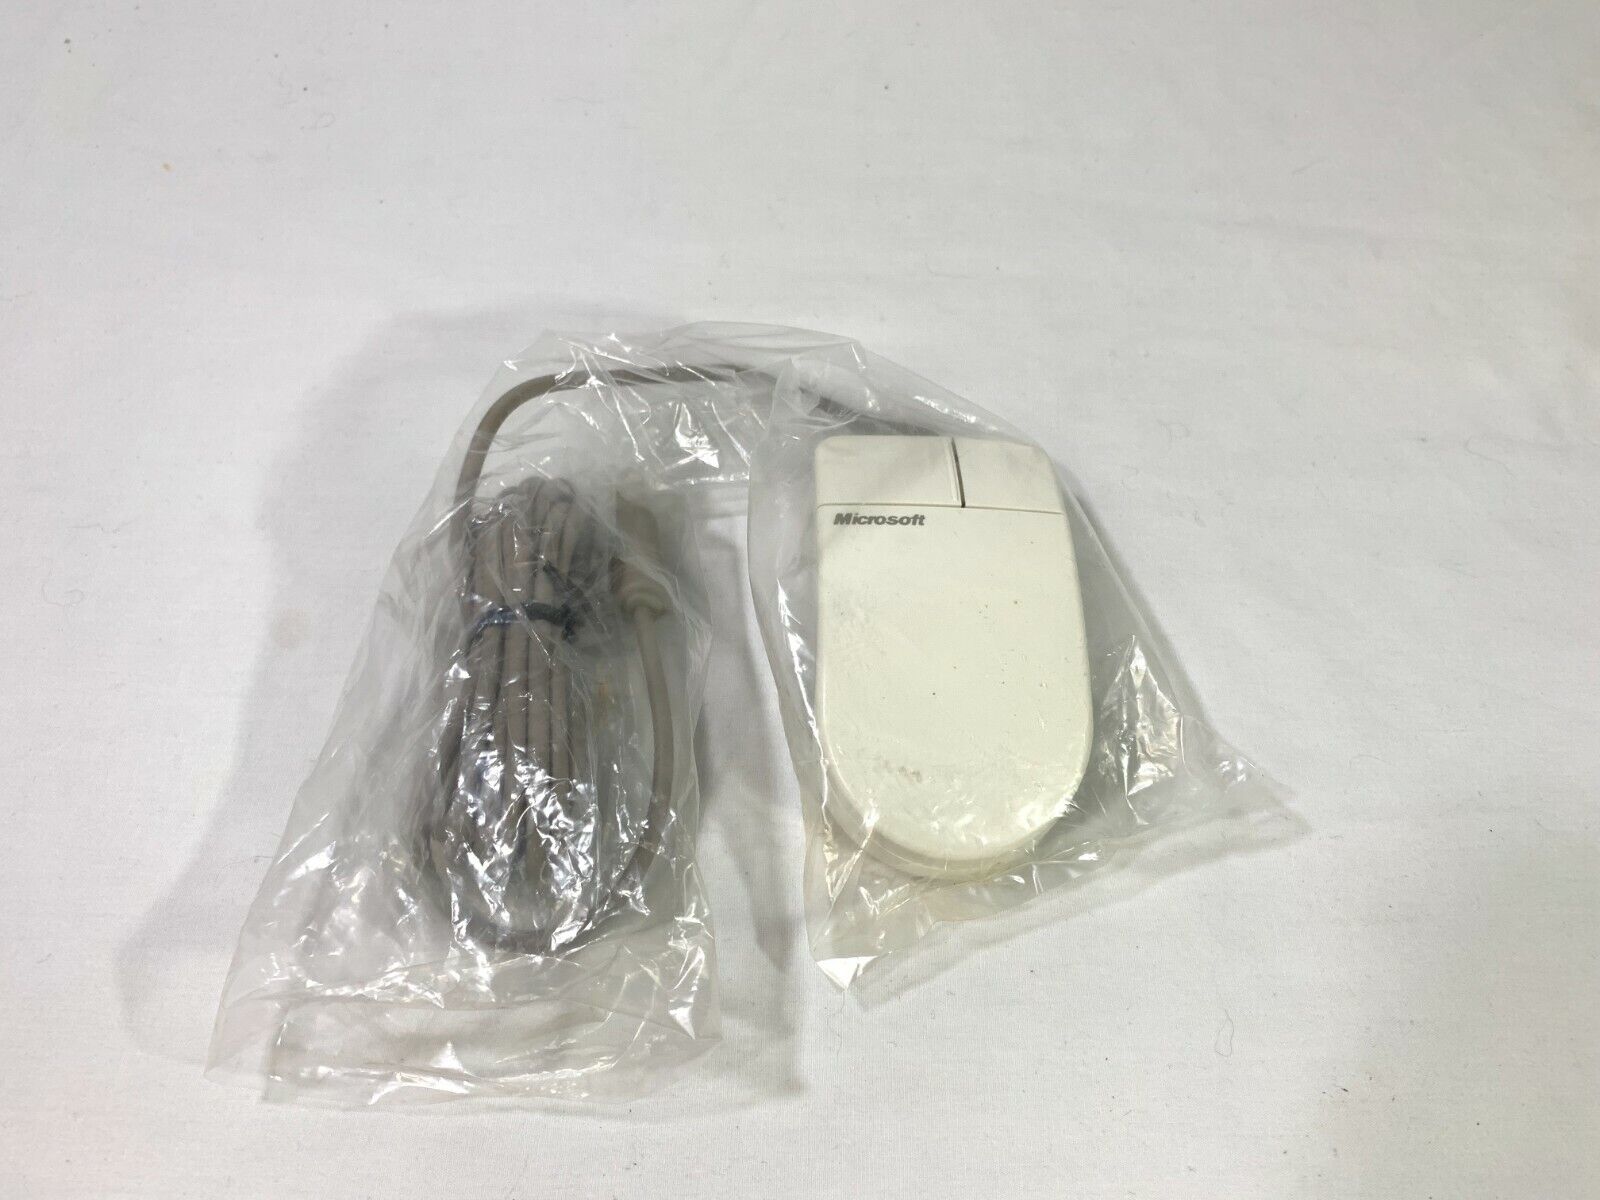 NEW Vintage Microsoft InPort Mouse Two Button PS/2 Roller Ball White 